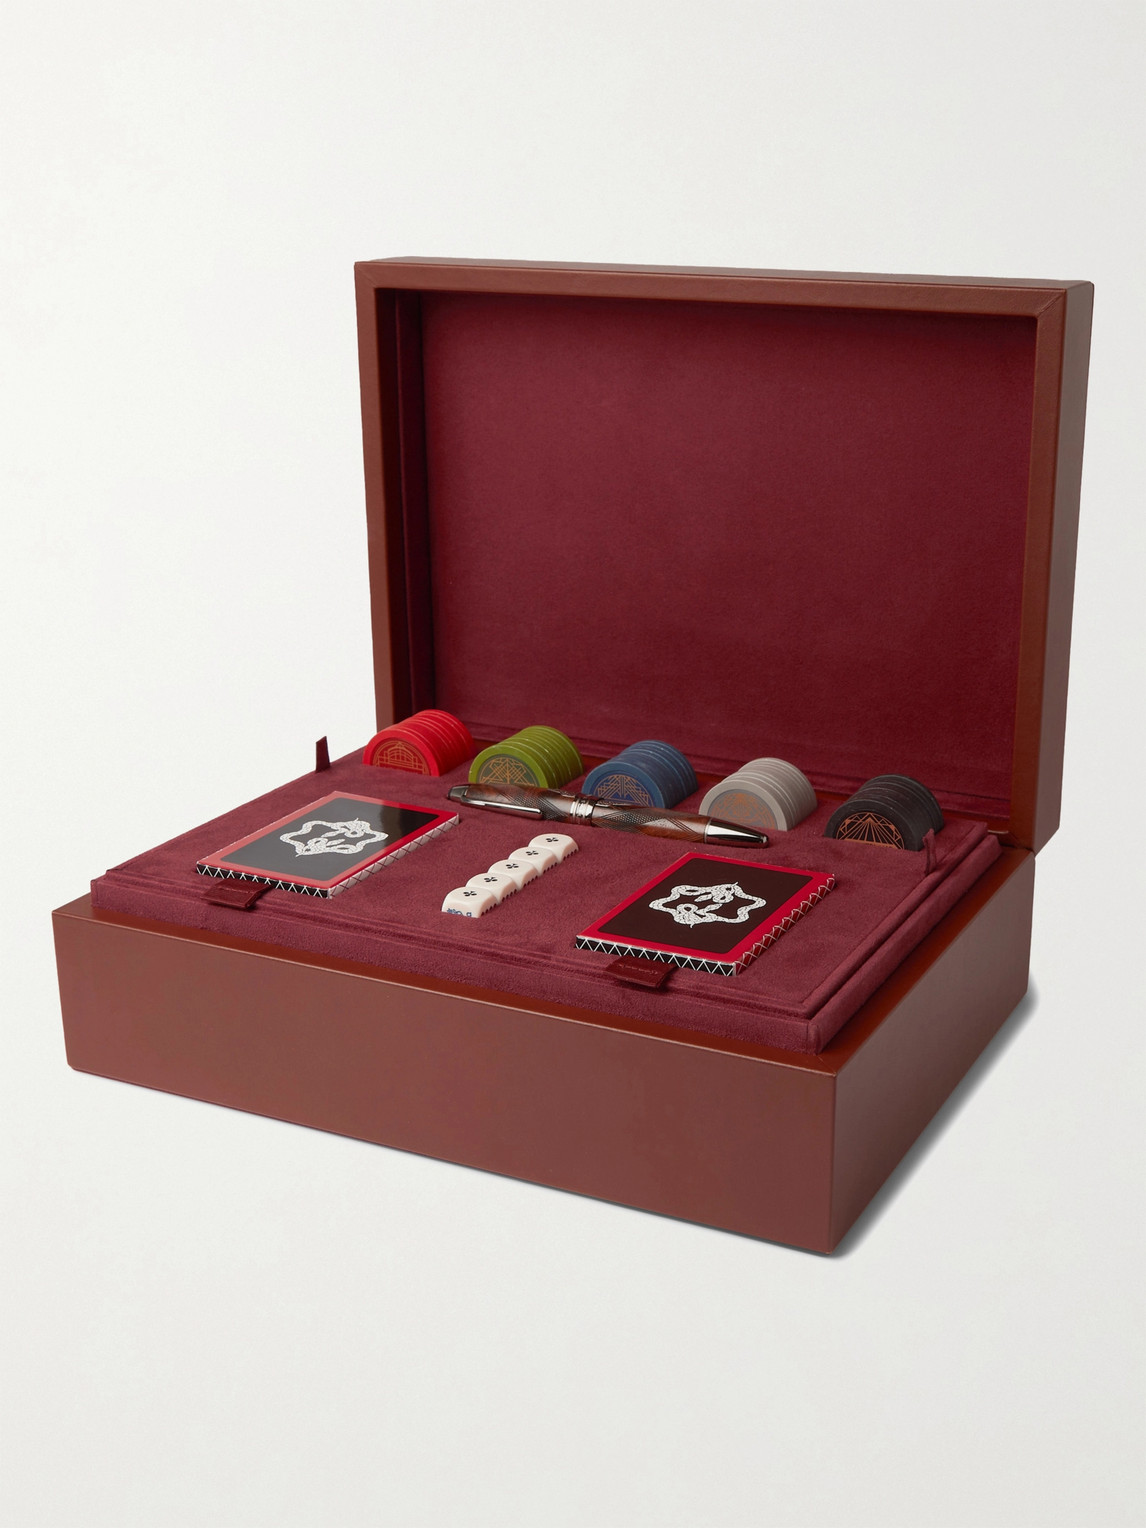 Montblanc Purdey The Art Of Gifting Poker Set In Brown